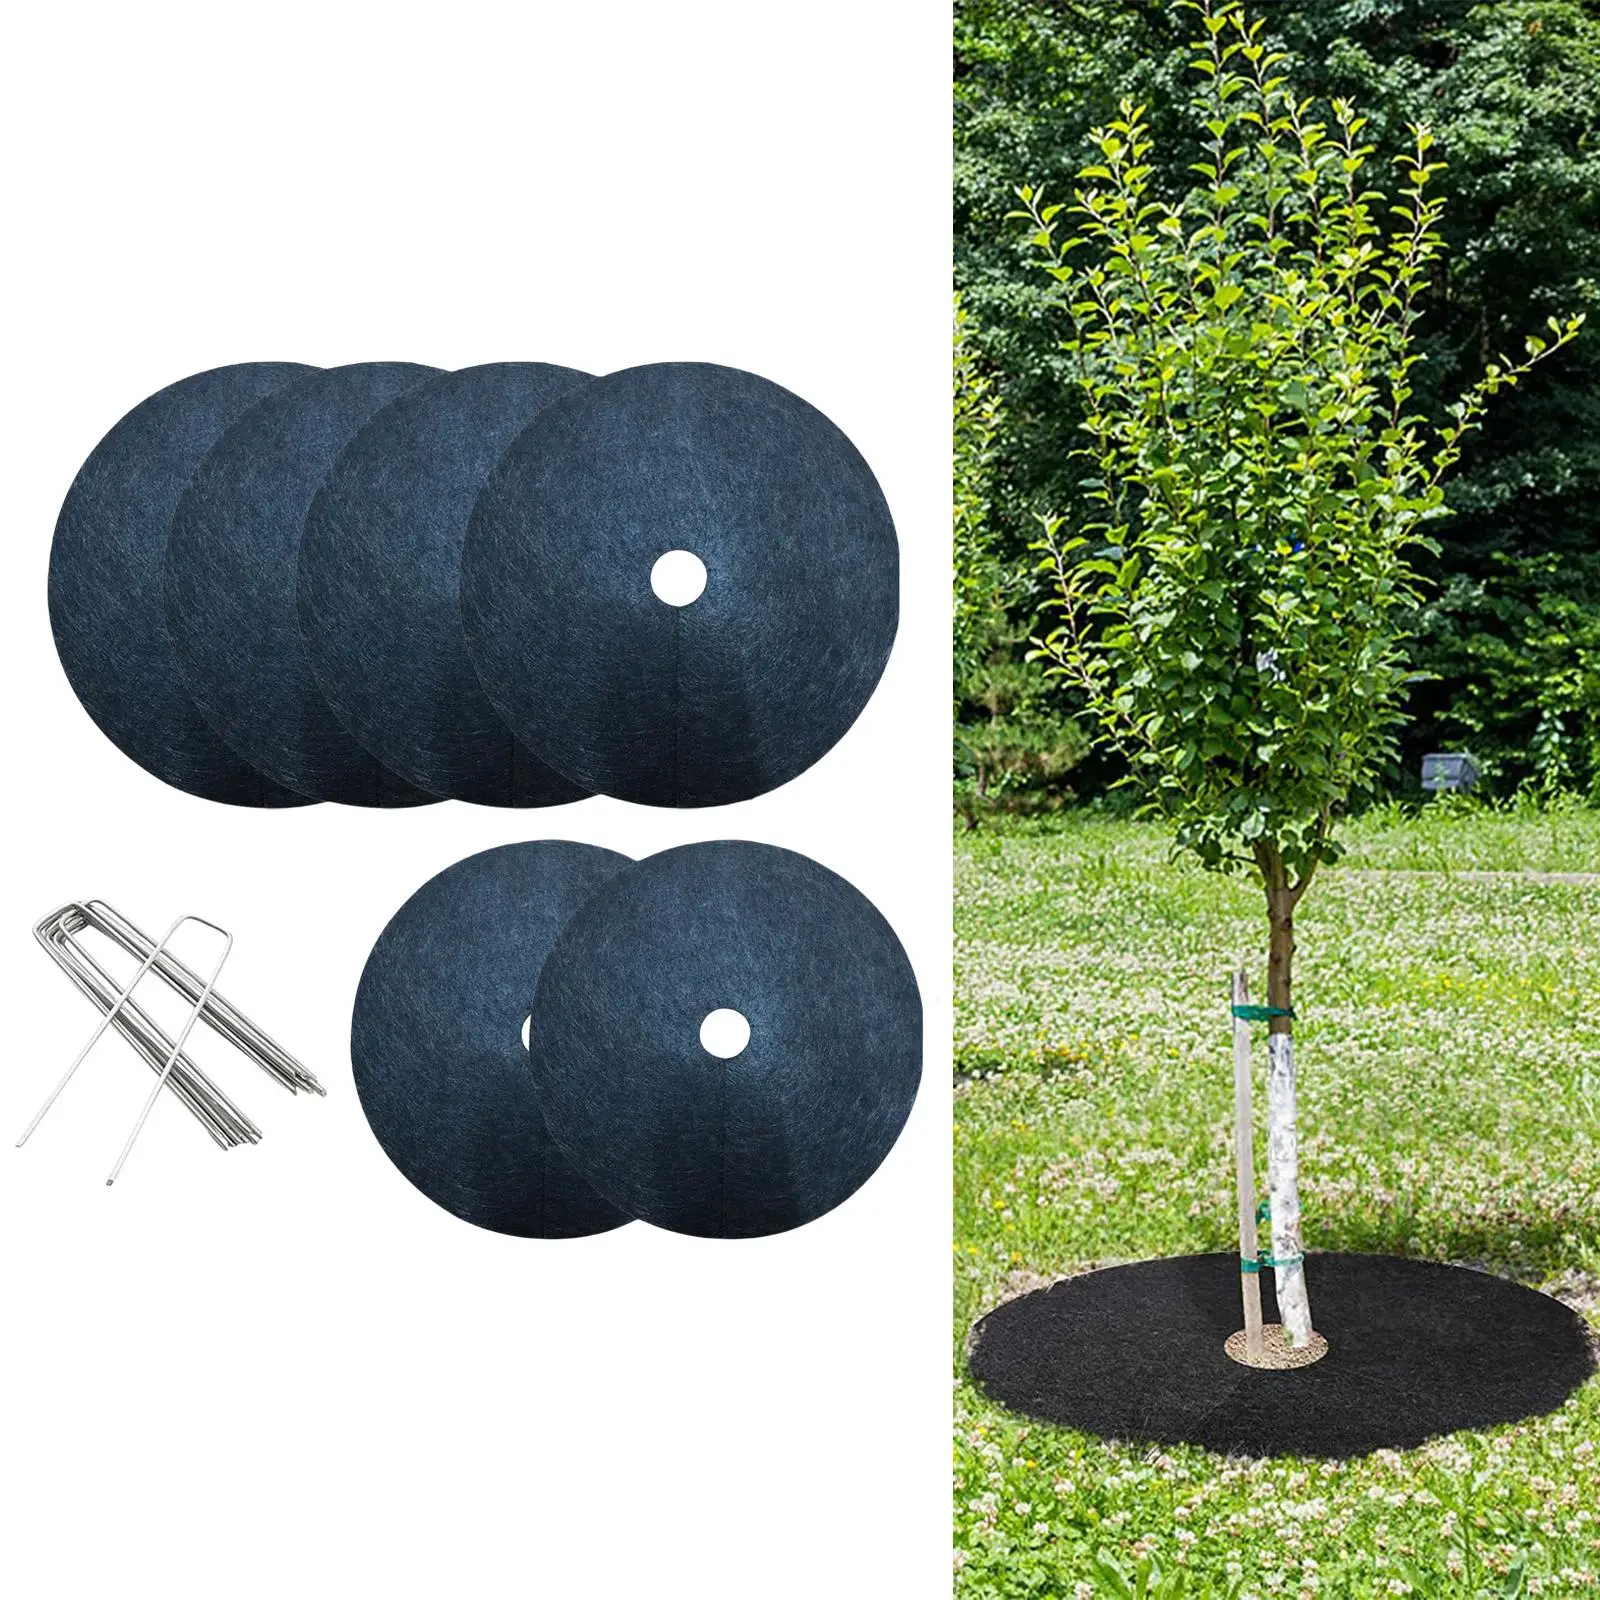 6 Pieces Non Woven Cloth Tree Protection Weed Mats, Weed Barrier Plant Cover Gardening Fabric Cover for Gardens Outdoor Orchard